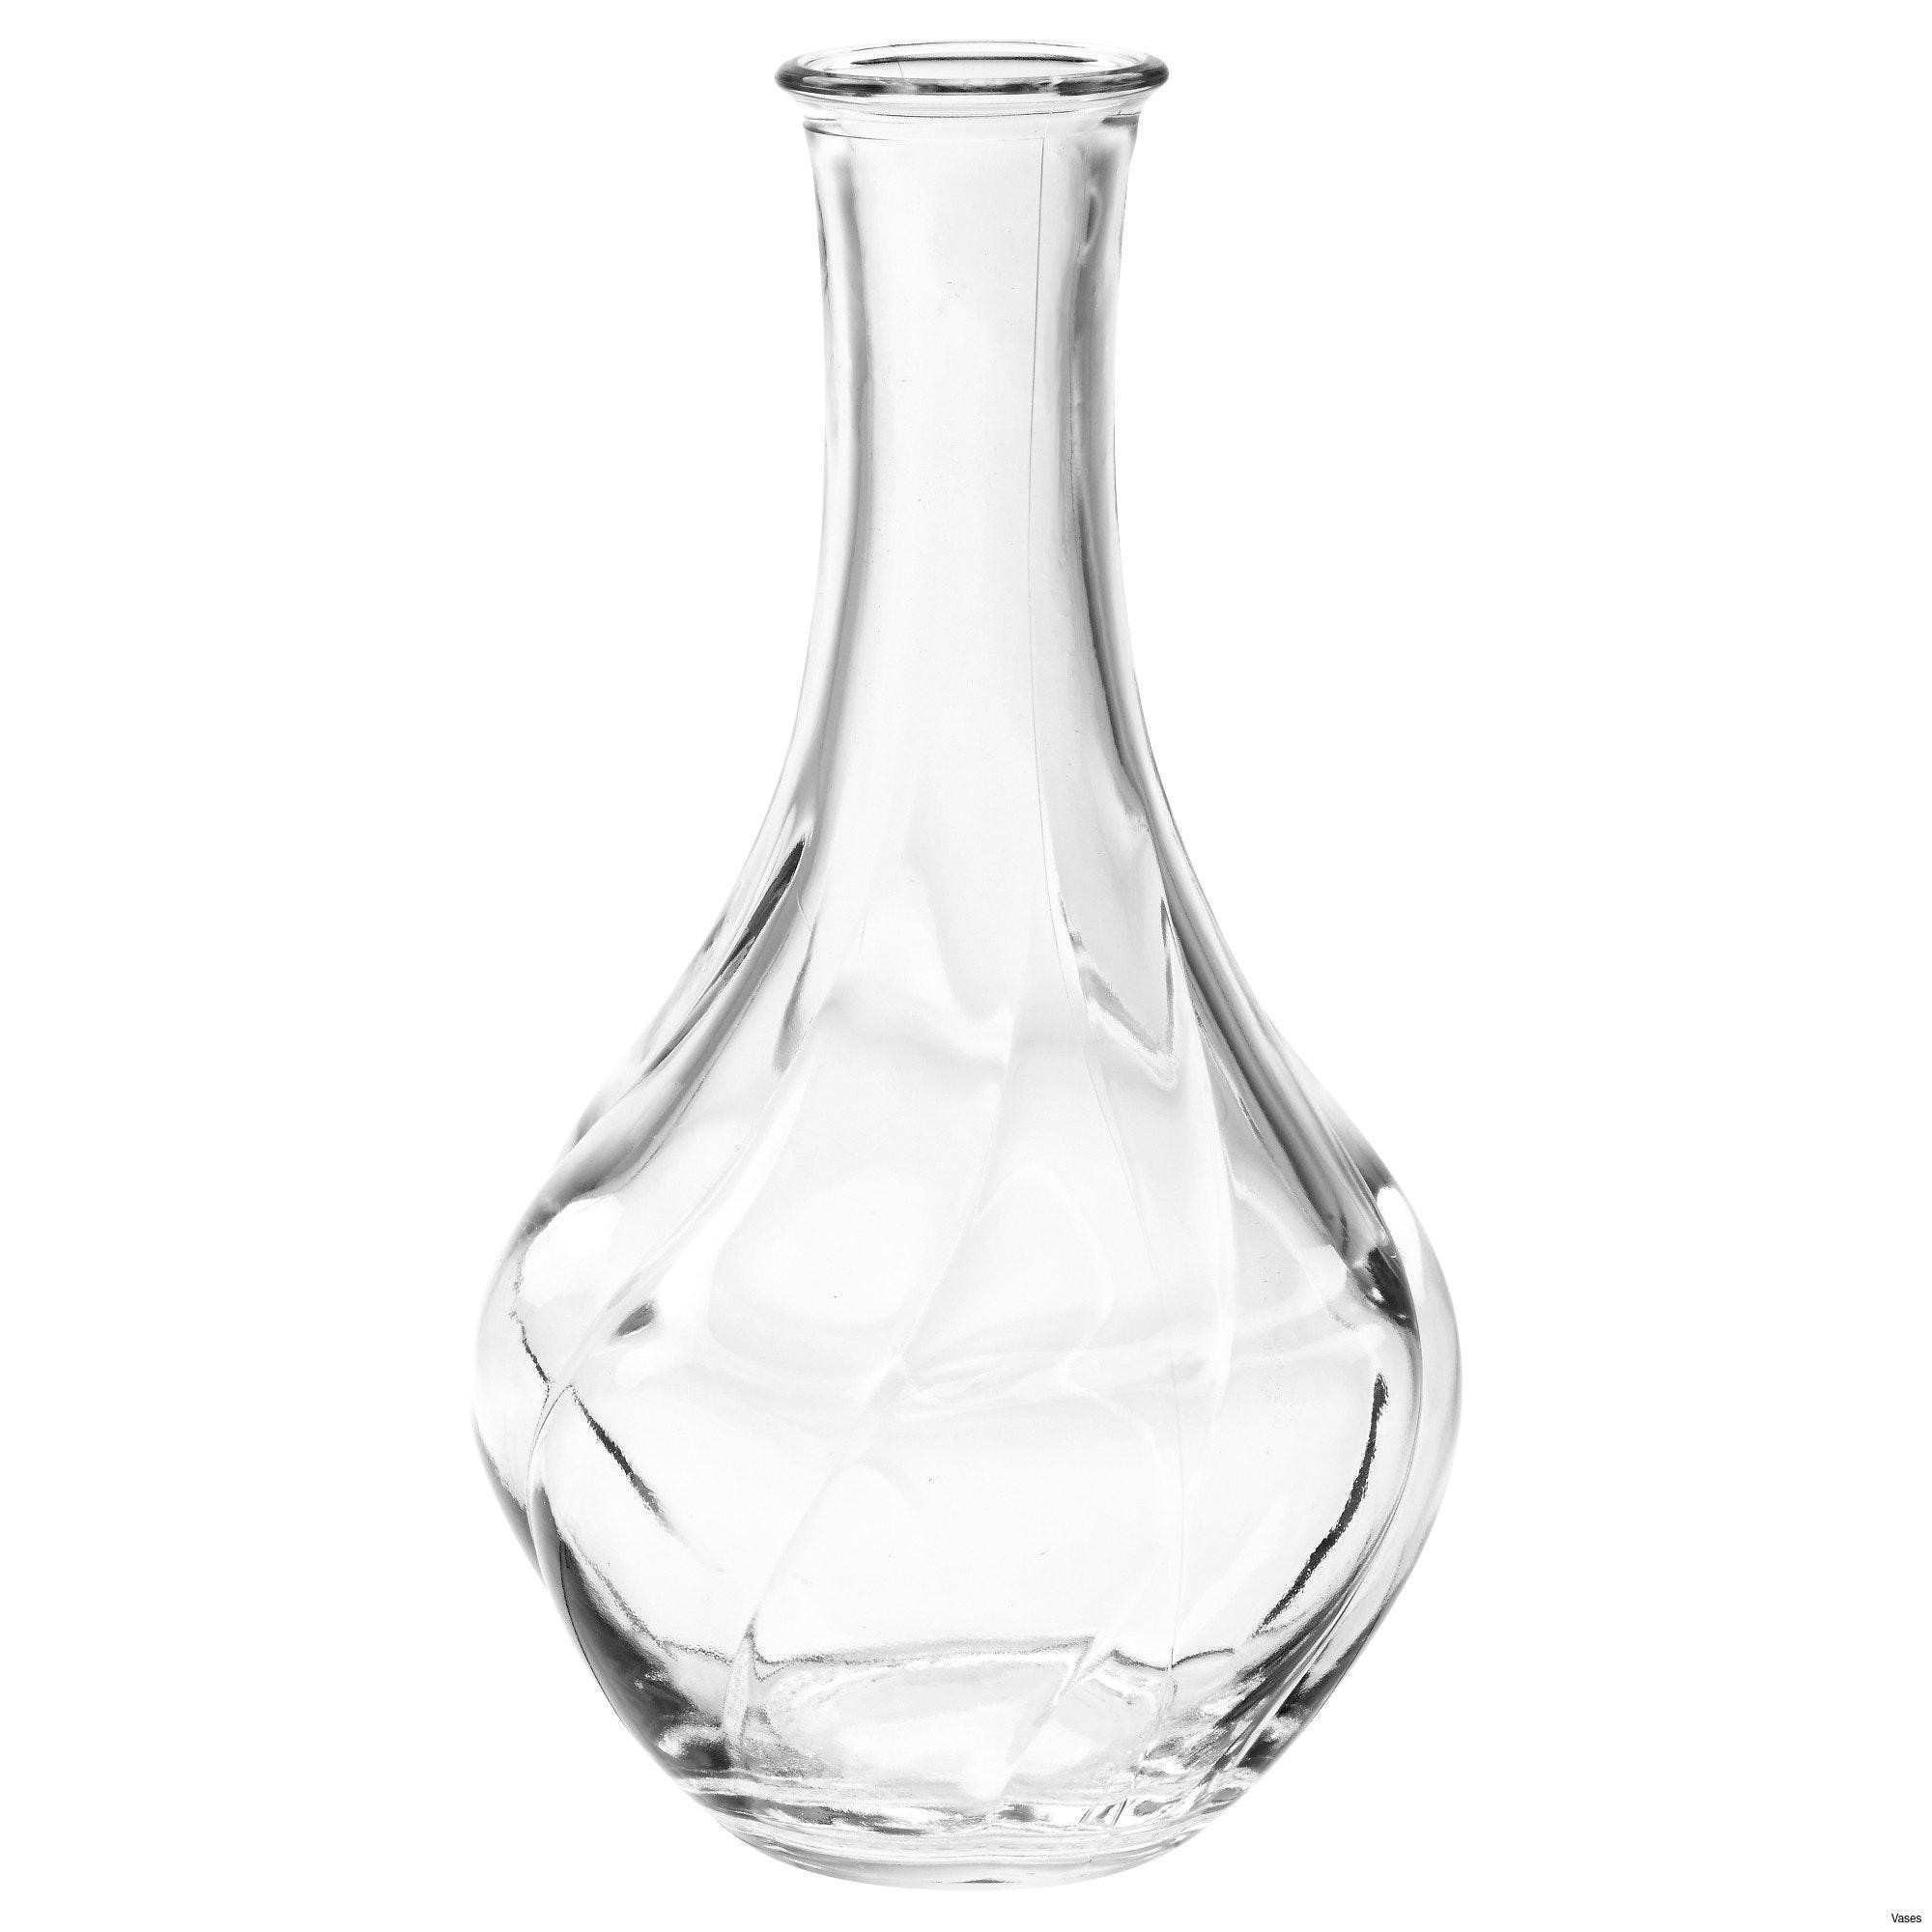 waterford footed vase of small crystal vase photos waterford crystal vase 225 00 small 65 within small crystal vase photograph small outdoor lights best living room glass vases fresh clear of small